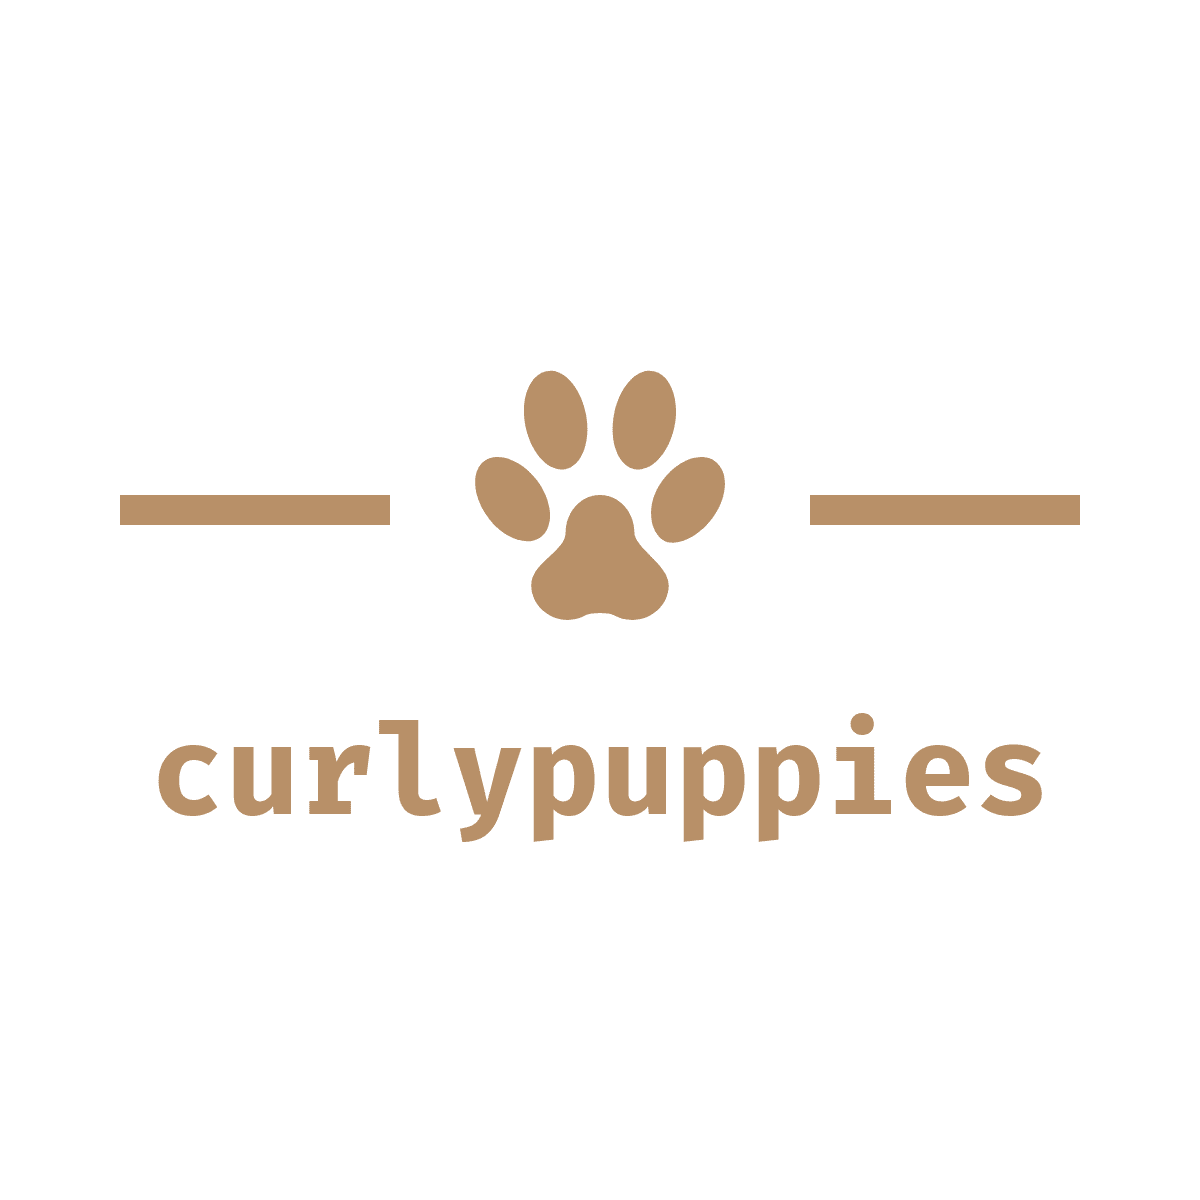 curlypuppies